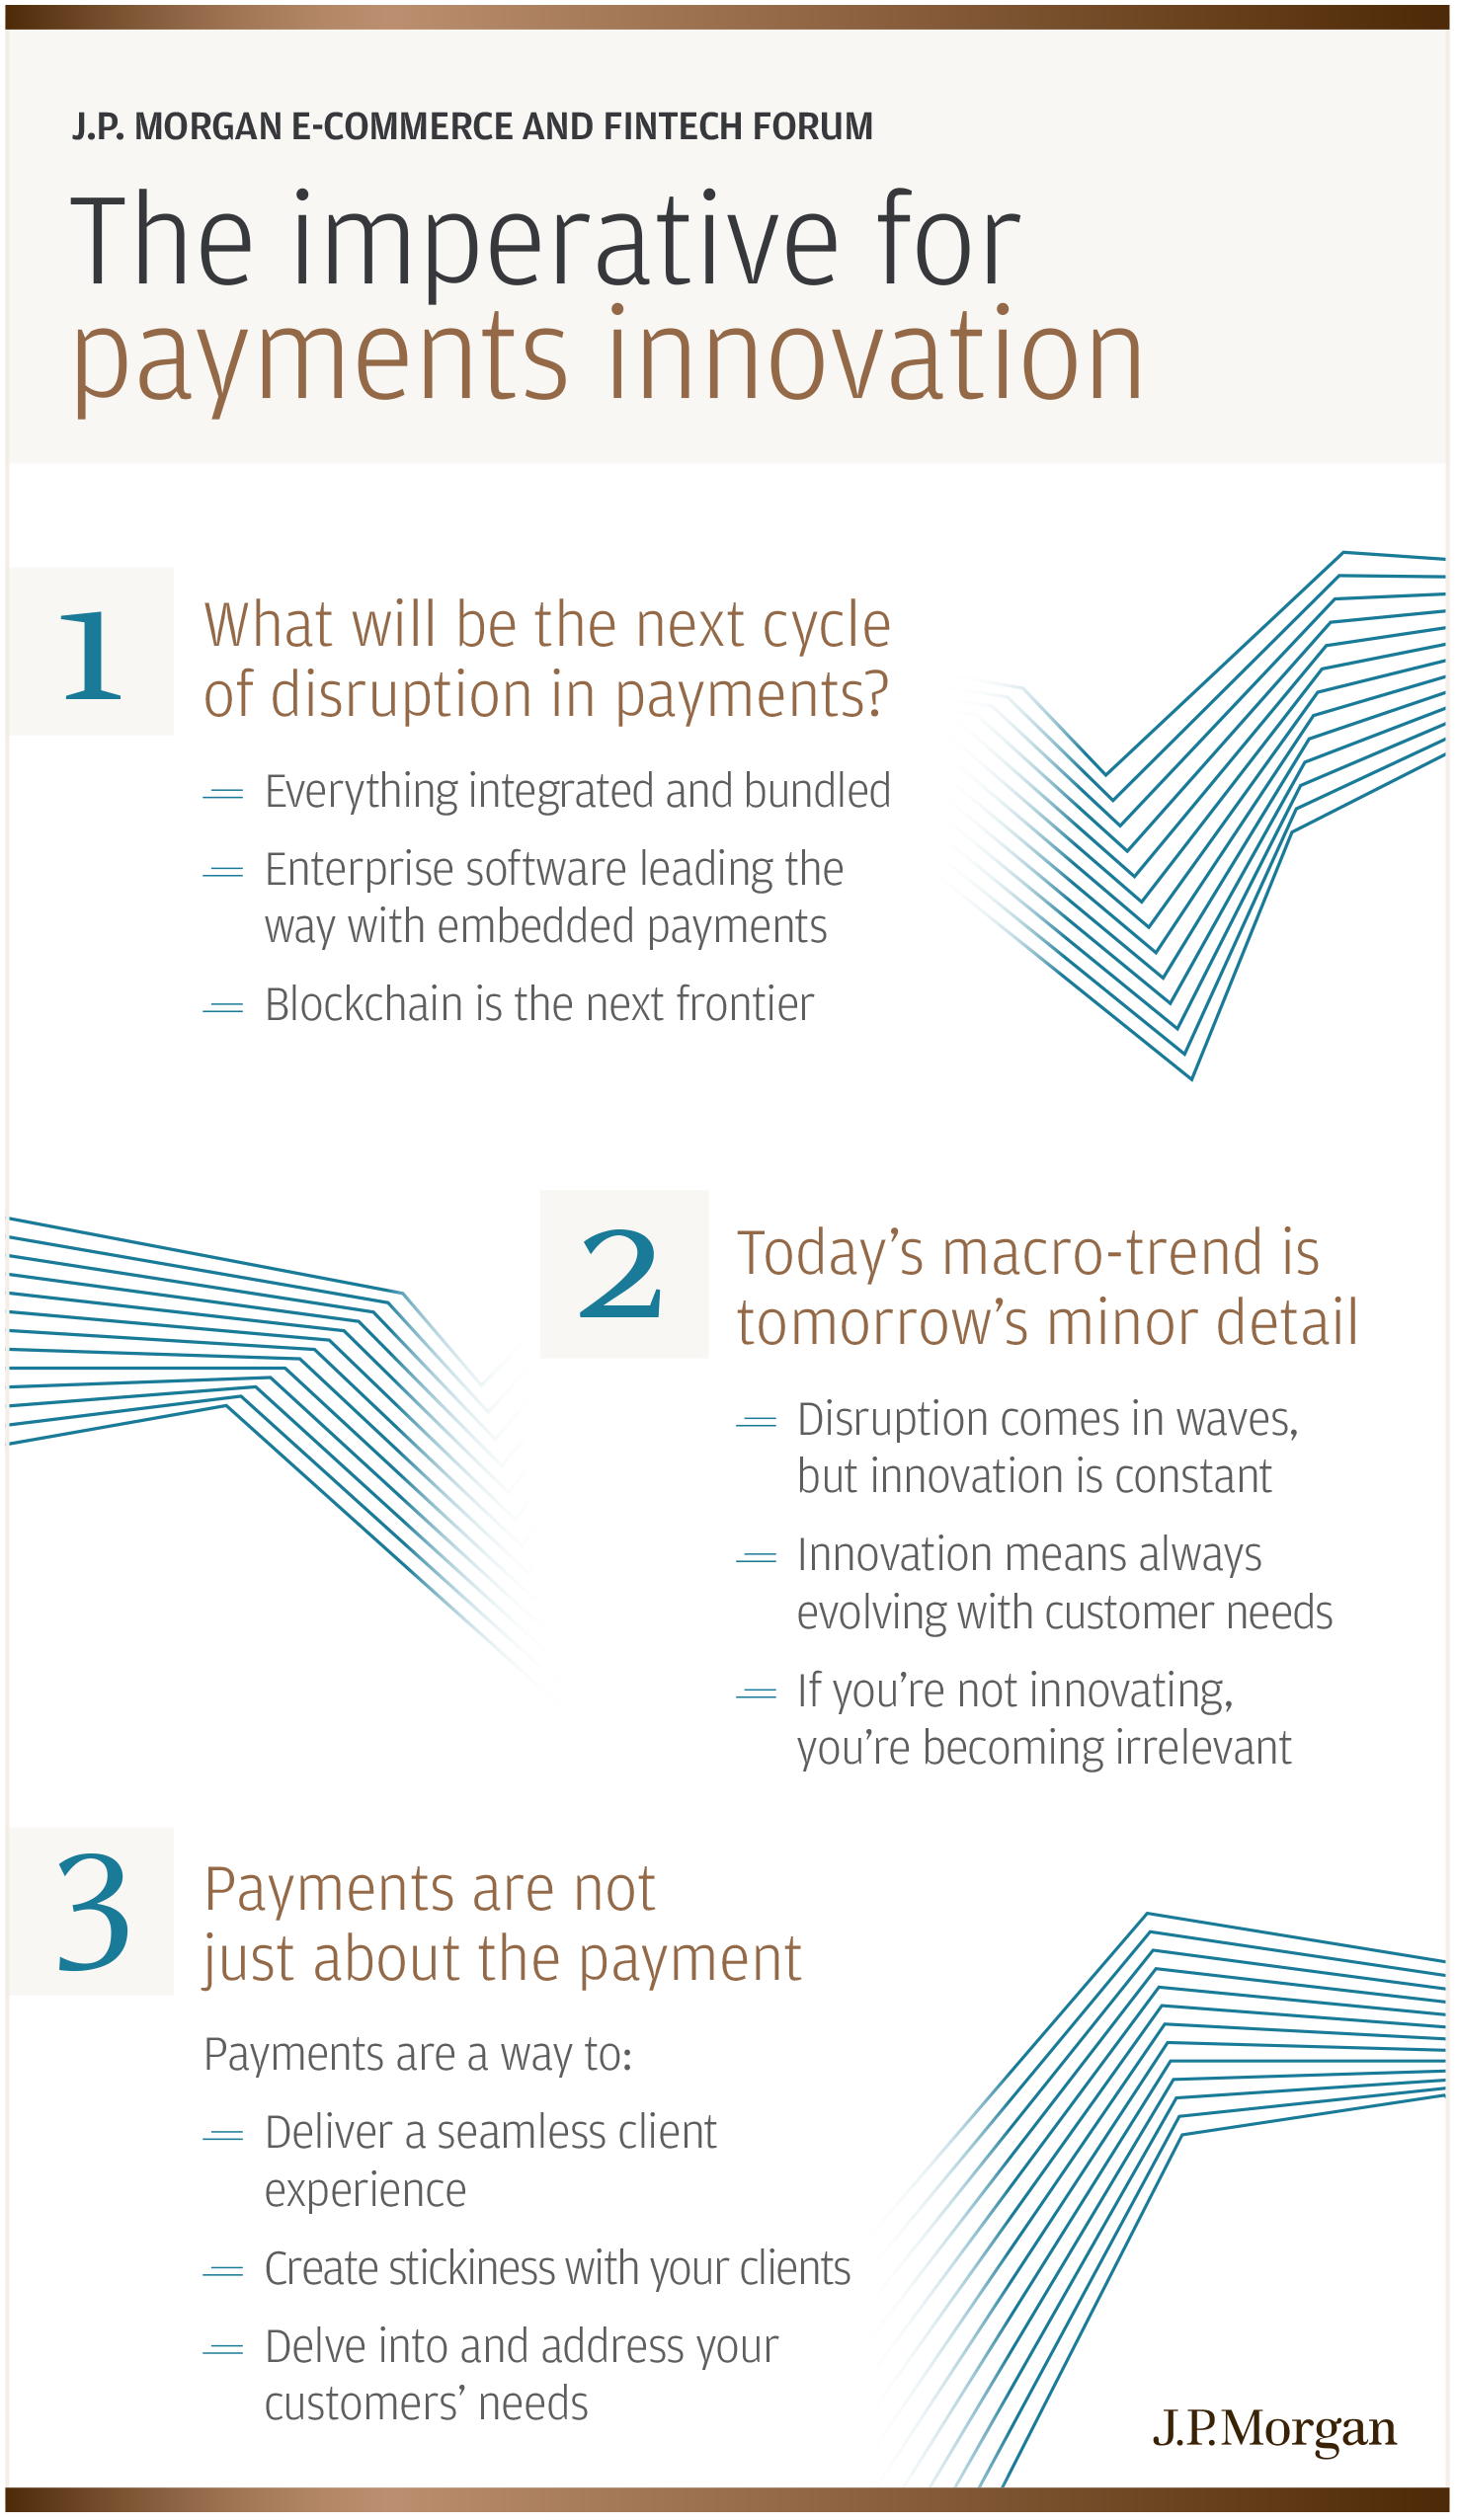 The battle for the consumer: the imperative for payments innovation